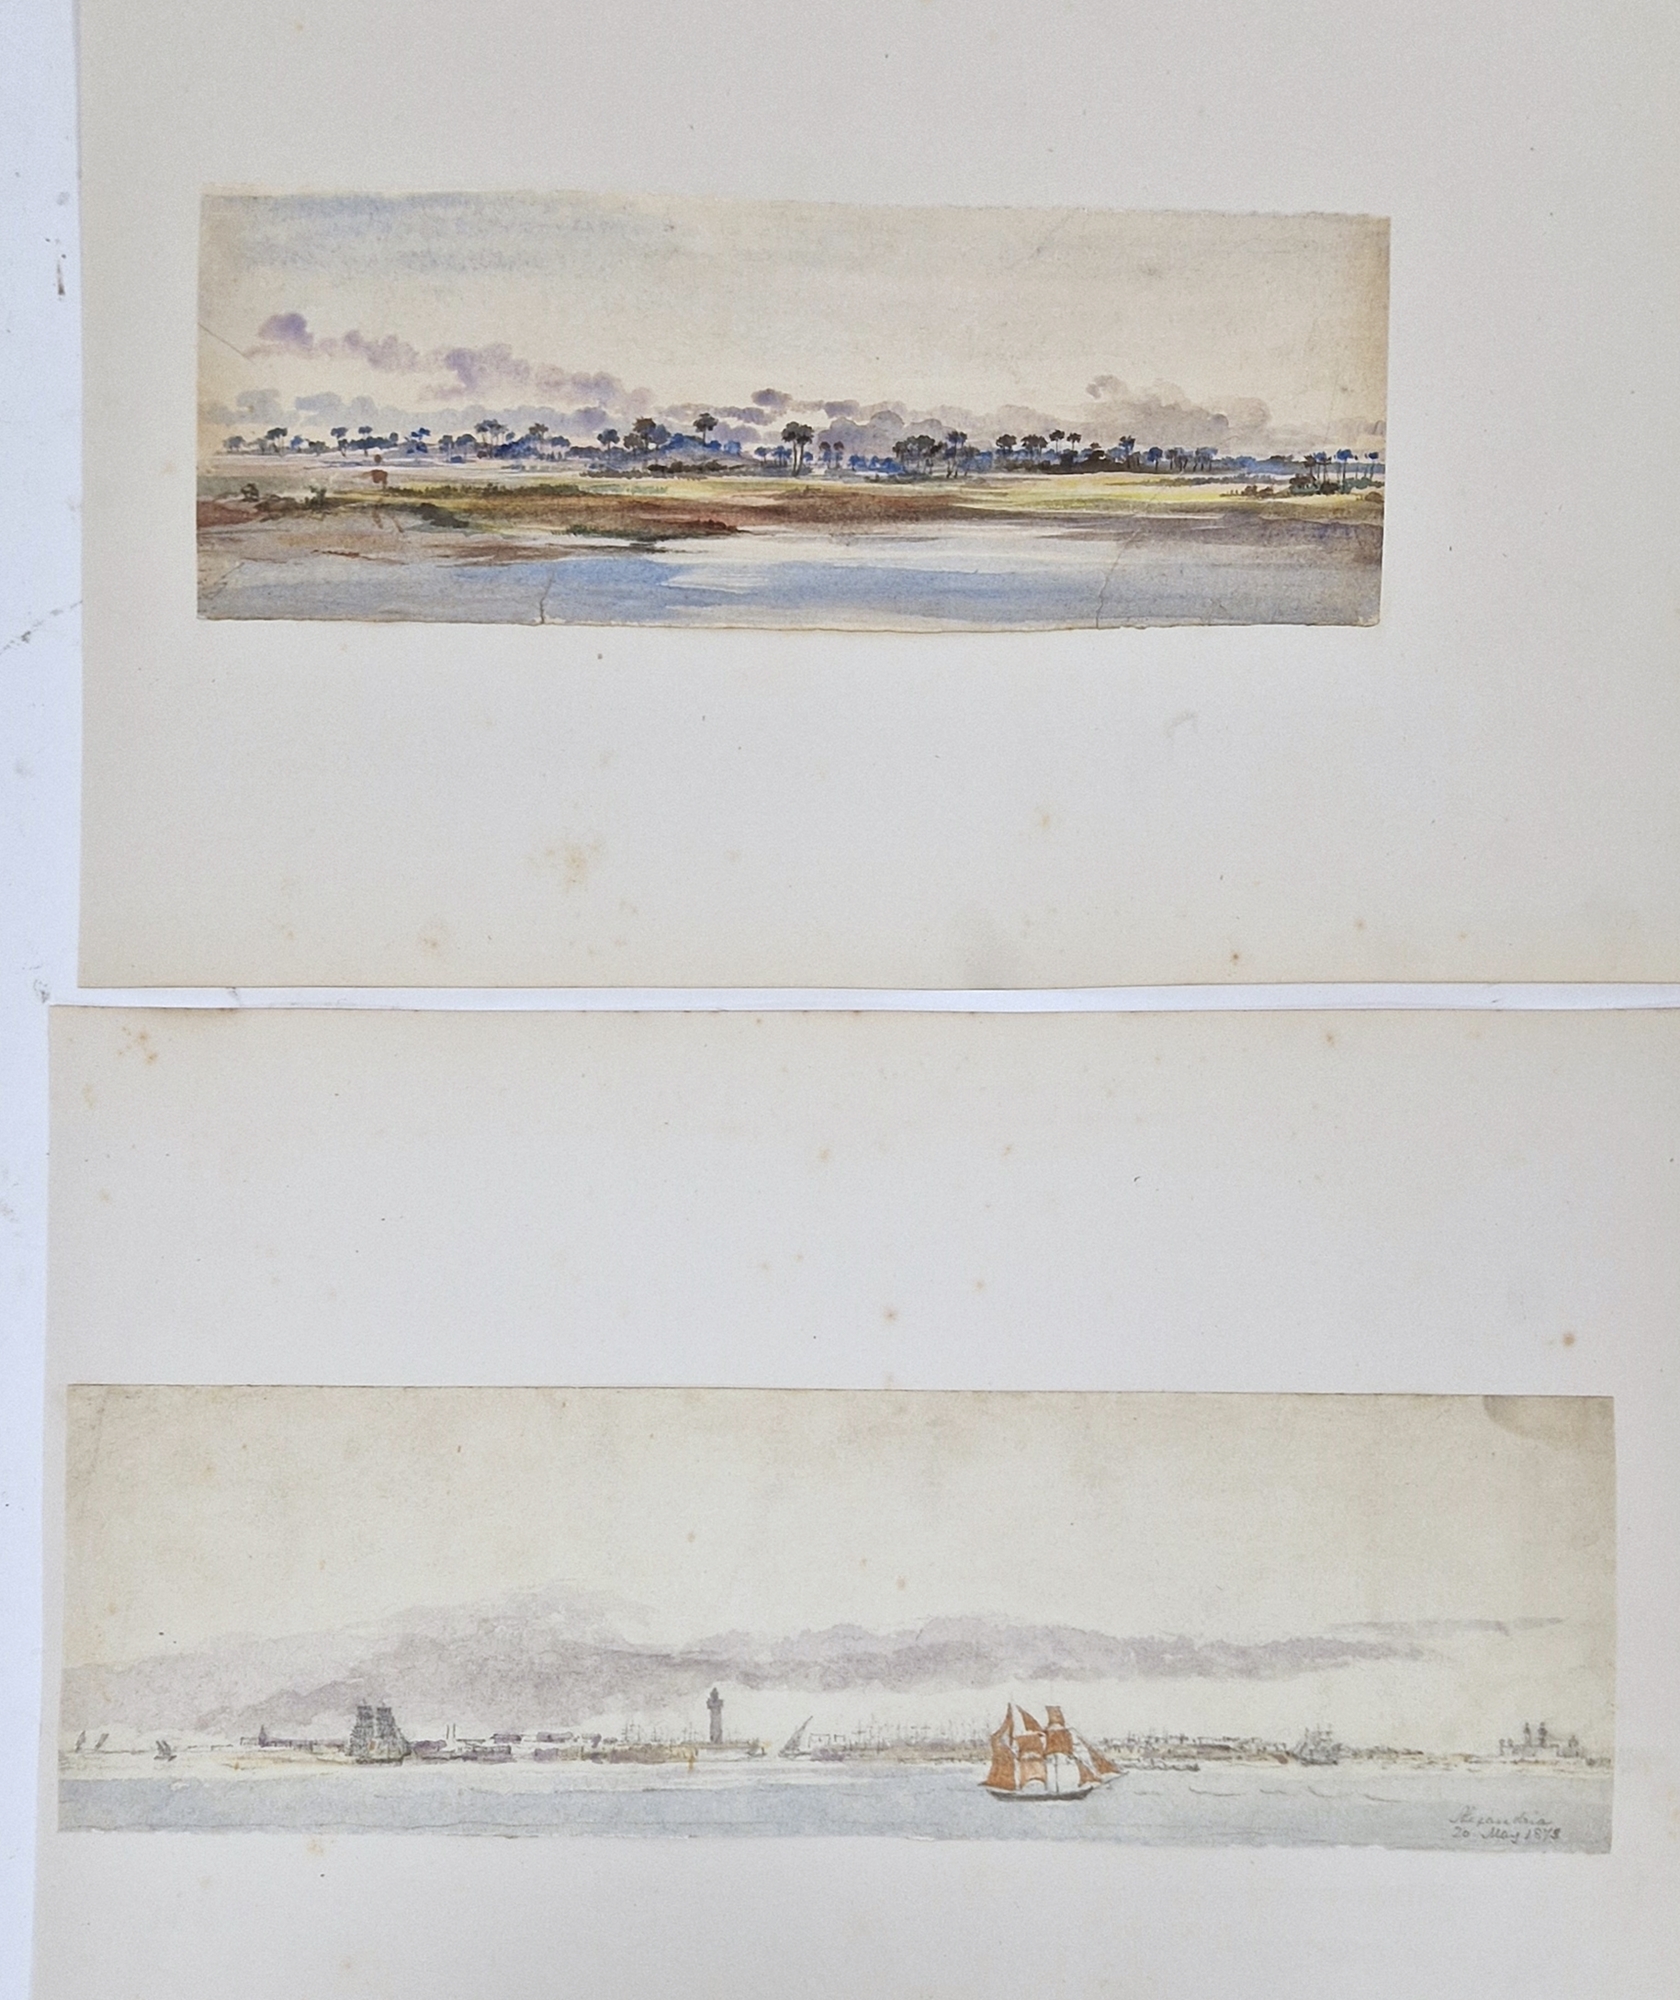 Watercolour drawings - collection Attrib. A H. Walter " A Passage from India to England 1873" - Image 5 of 13